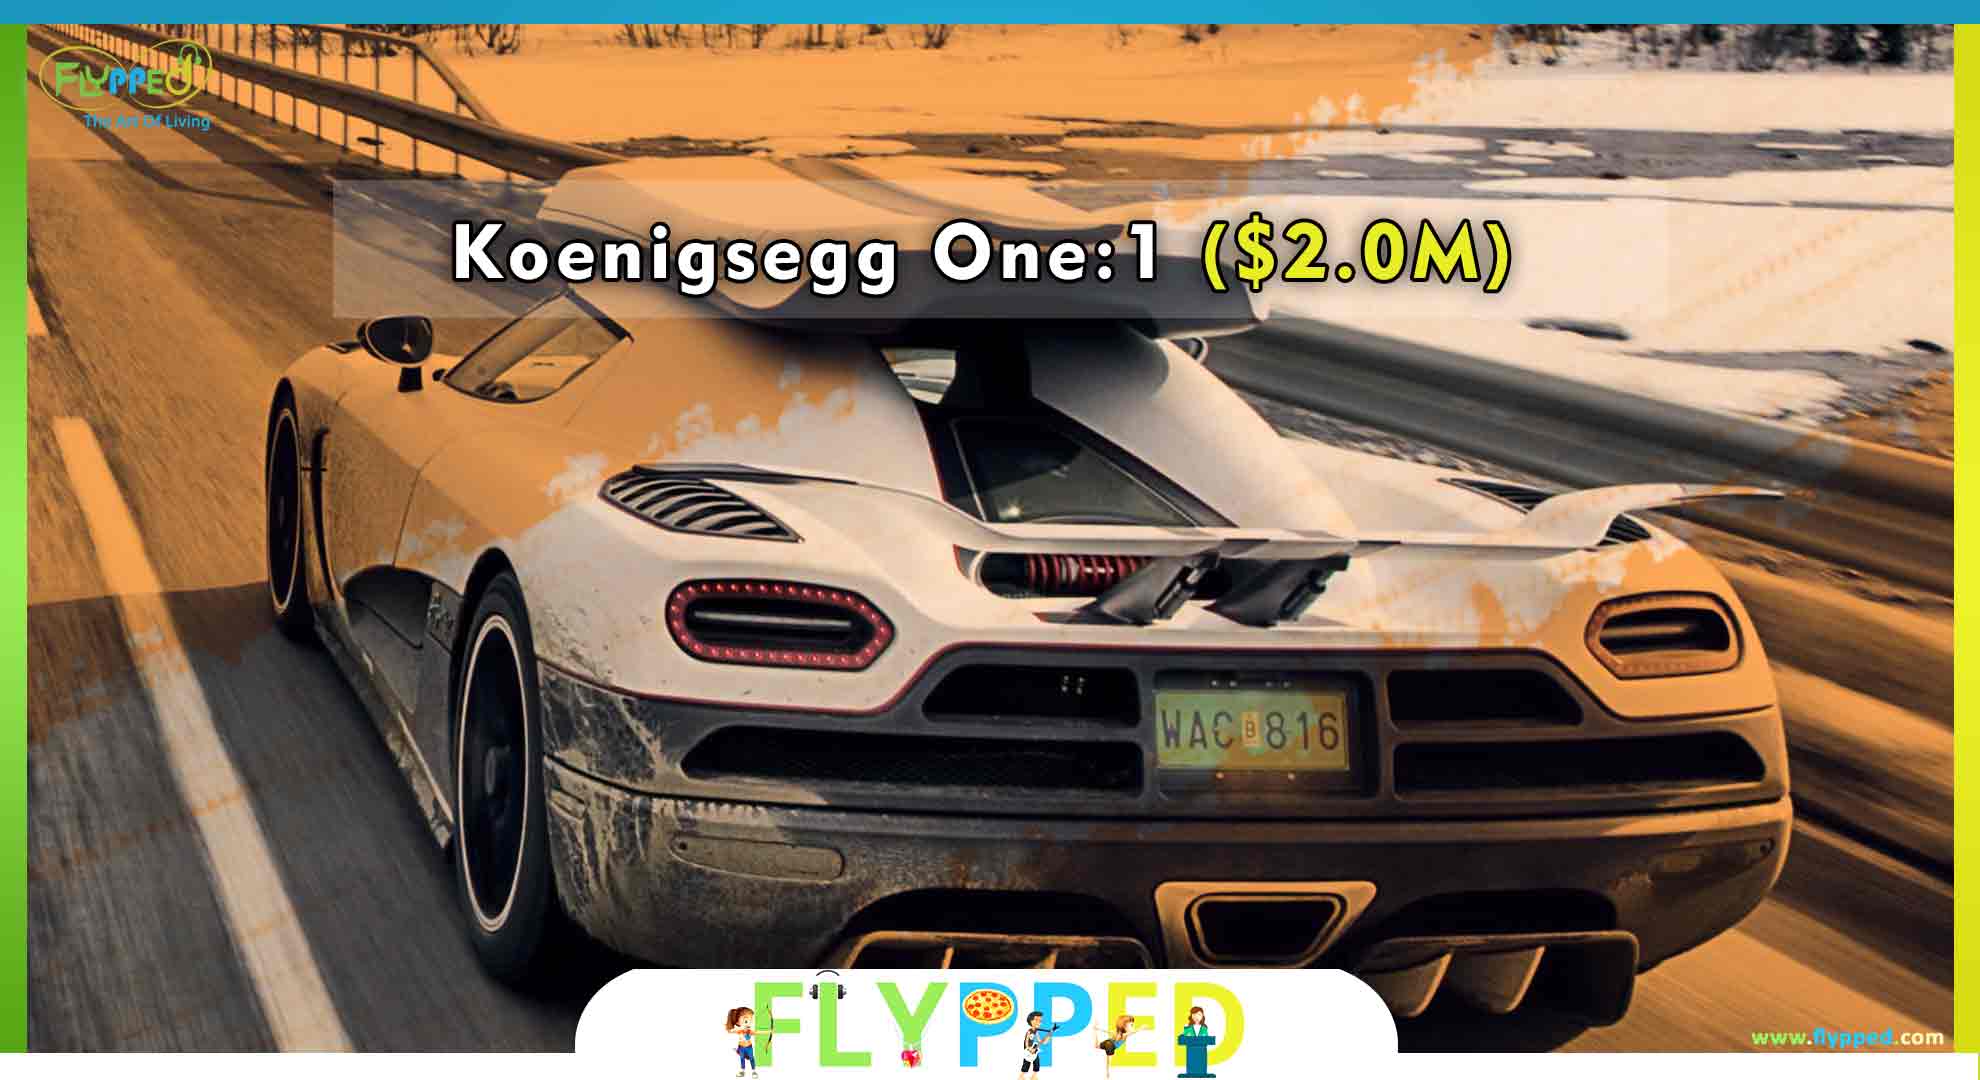 Top-10-most-expensive-cars-in-the-world-Koenigsegg-One:1